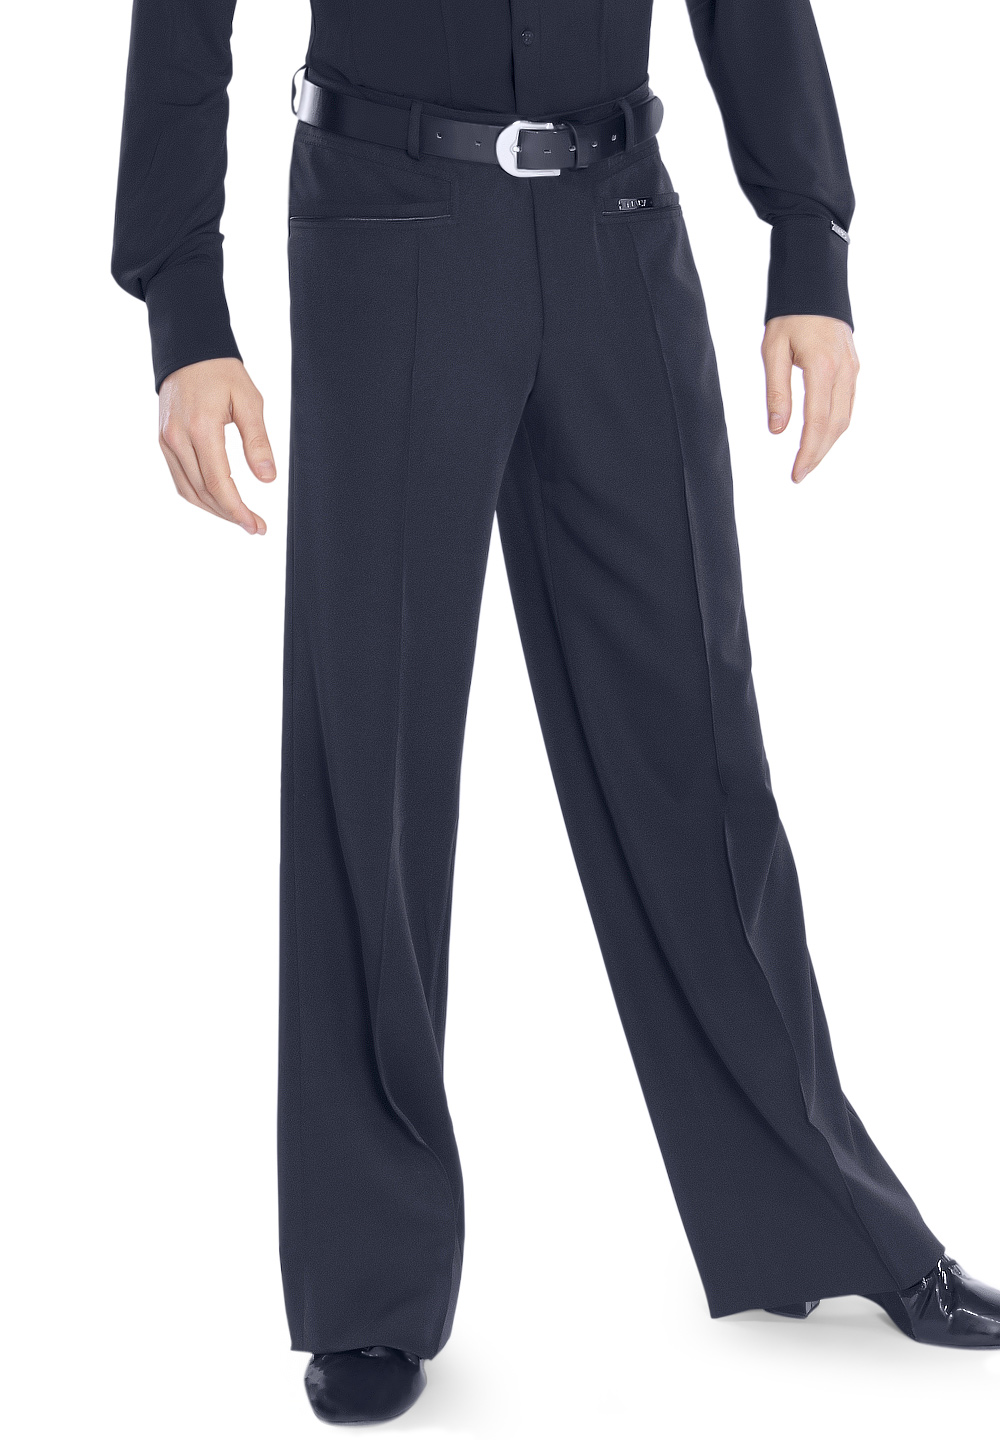 Maly Mens Piping Trim Practice Dance Trousers MF202402 | Dancewear